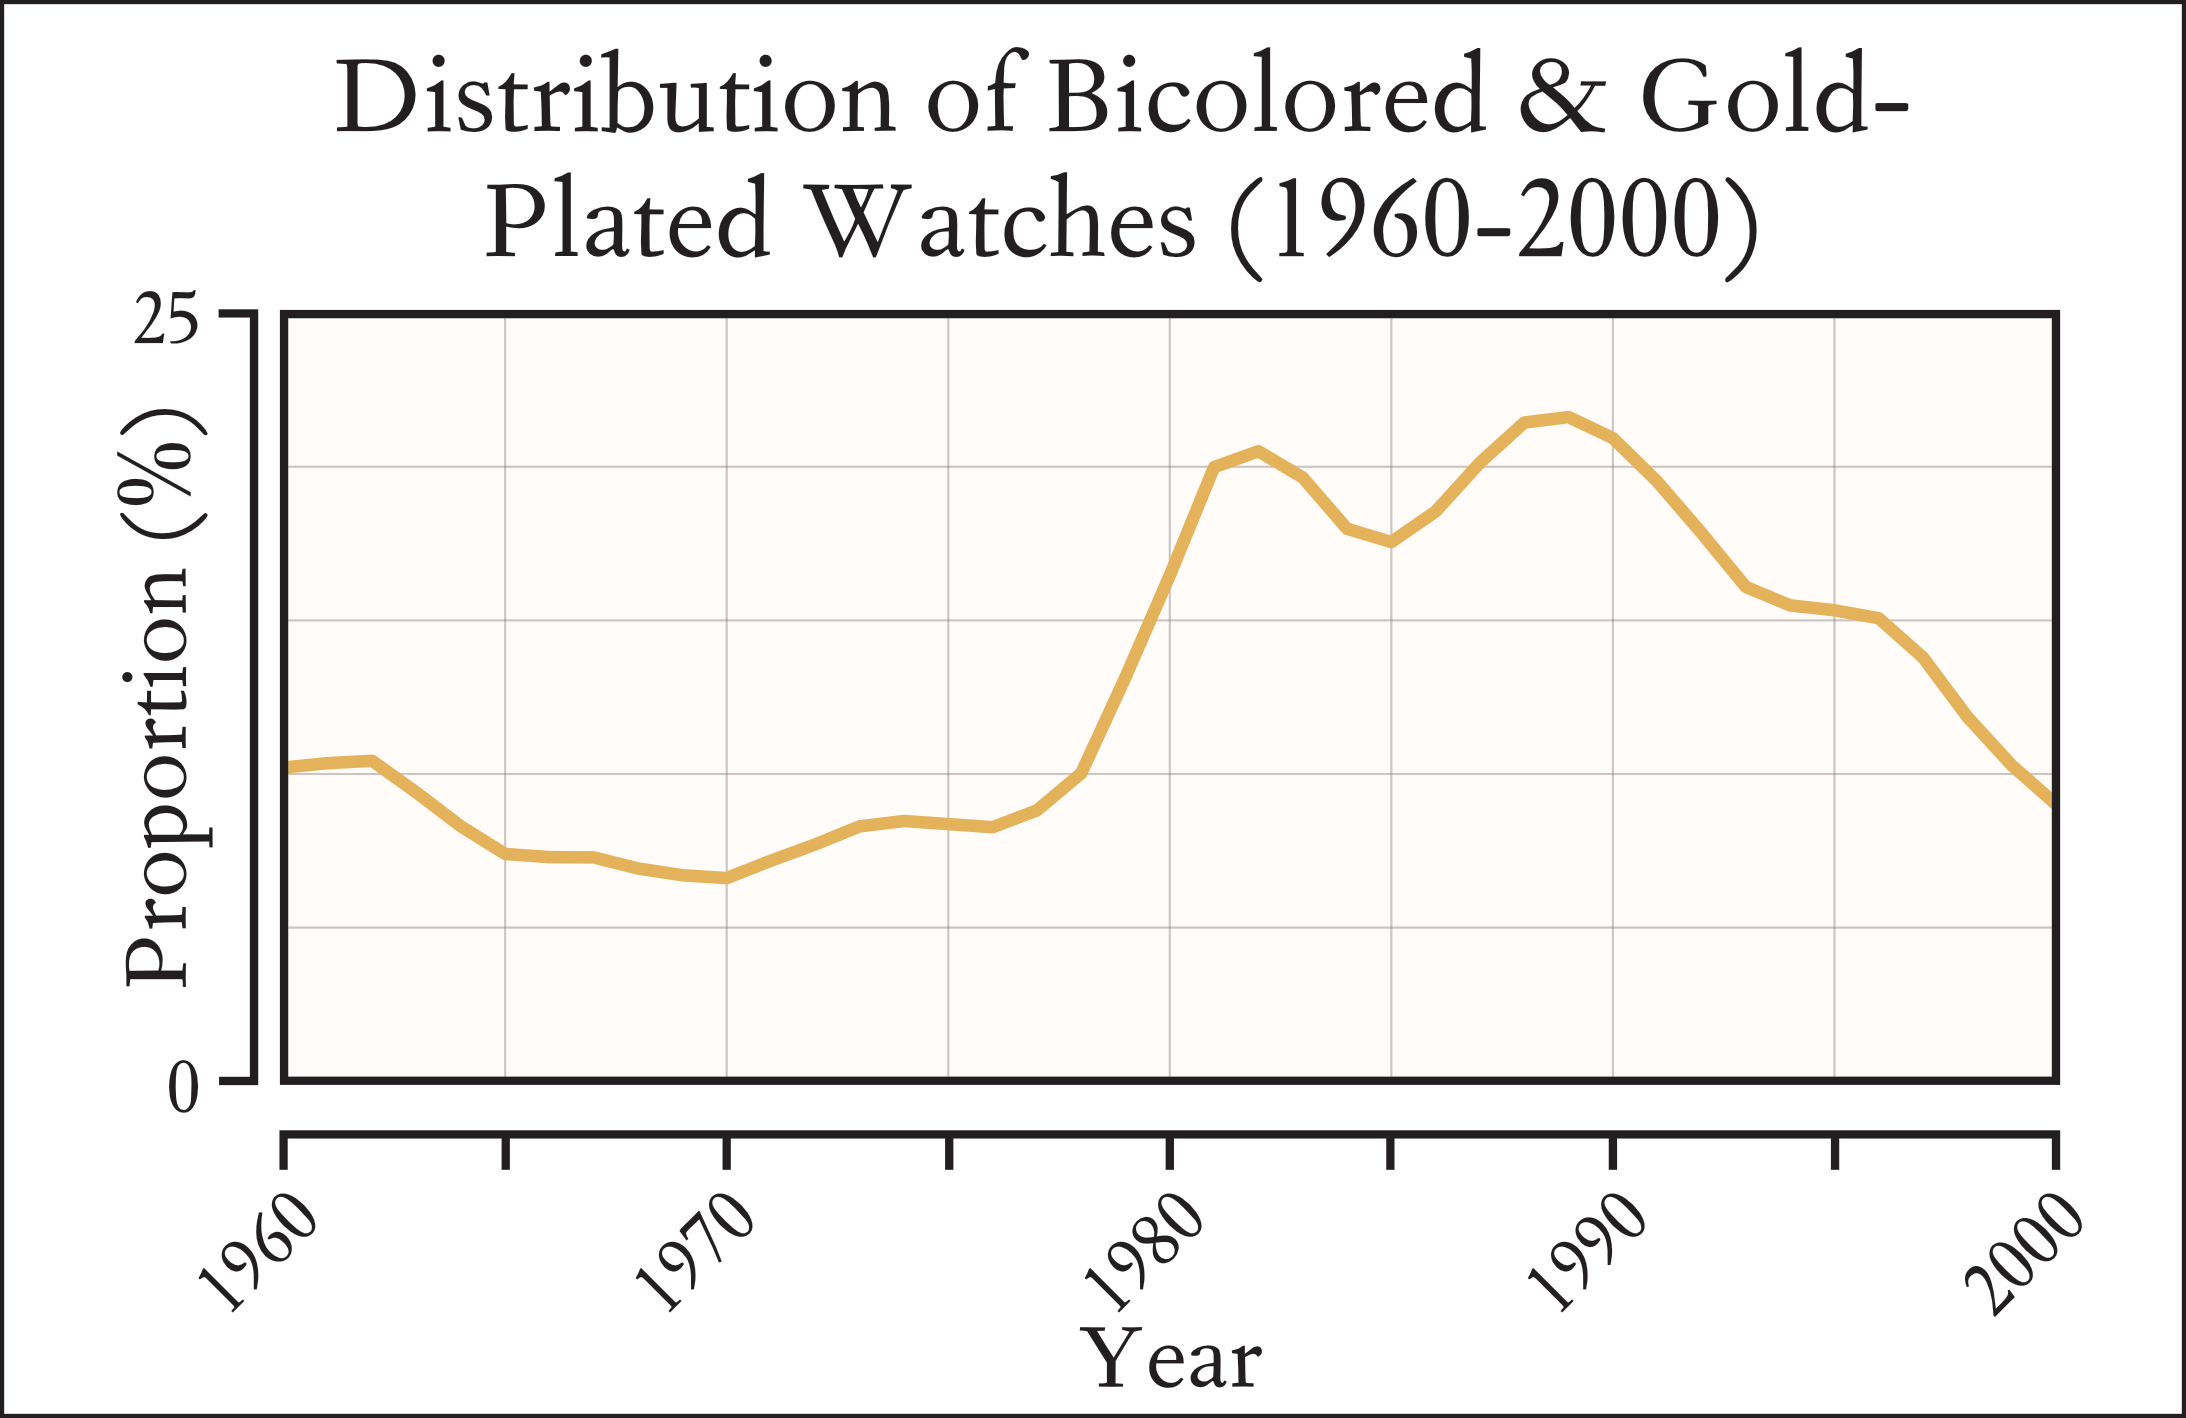 Distribution of Bicolored and Gold-Plated watches between 1960 and 2000